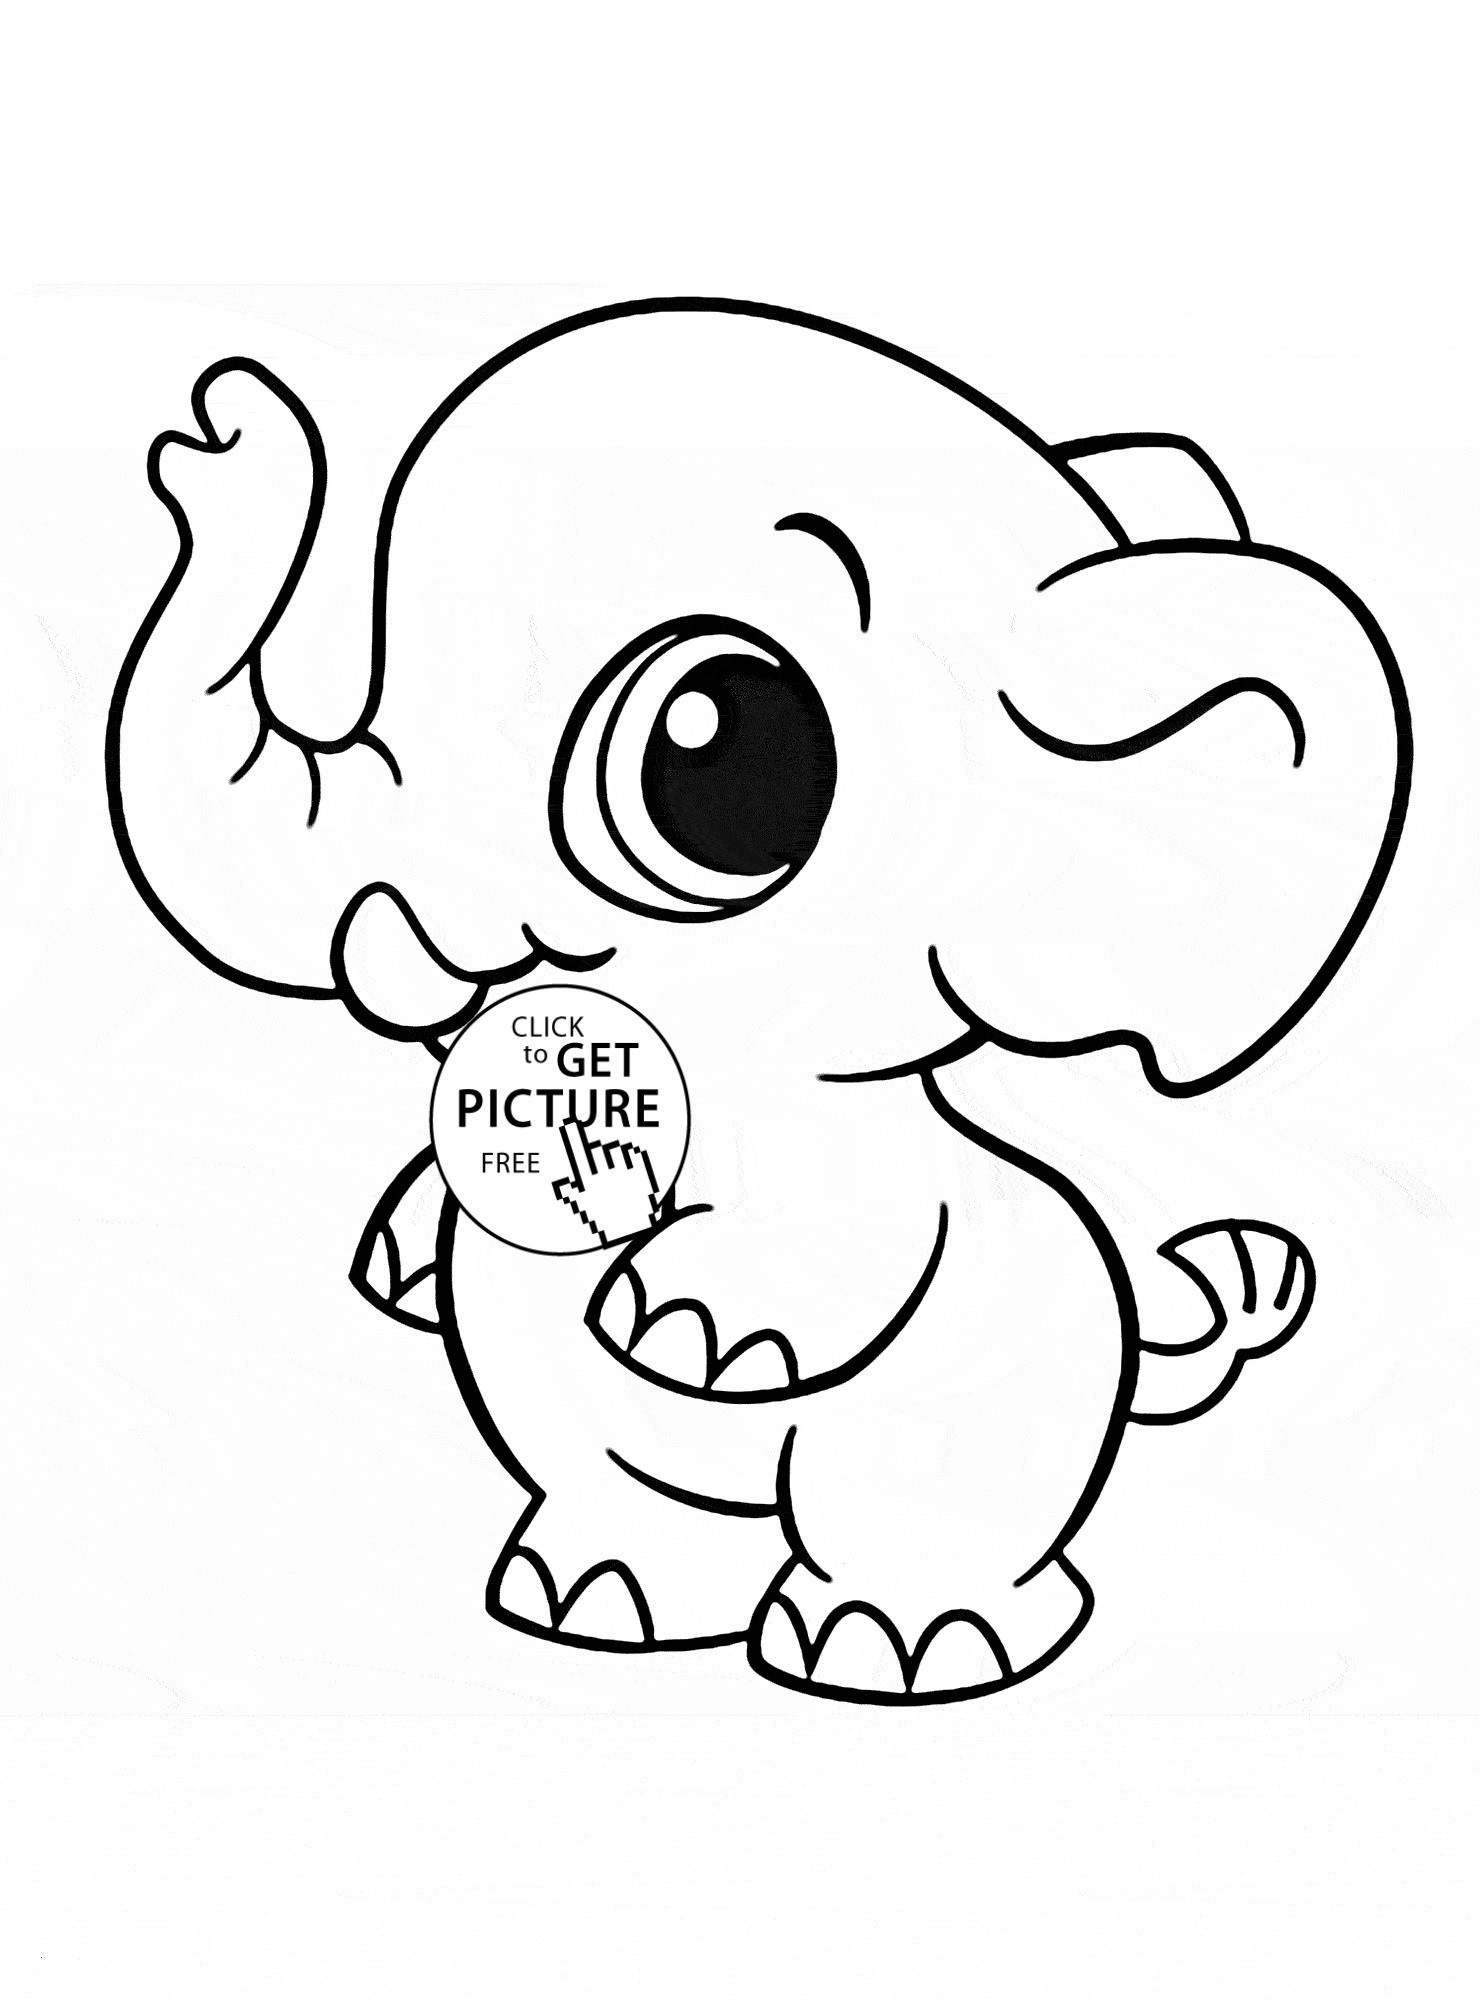 Cute Baby Animal Coloring Pages Beautiful Baby Animal Coloring Pages Lovely Funny Animals Coloring Page Cute